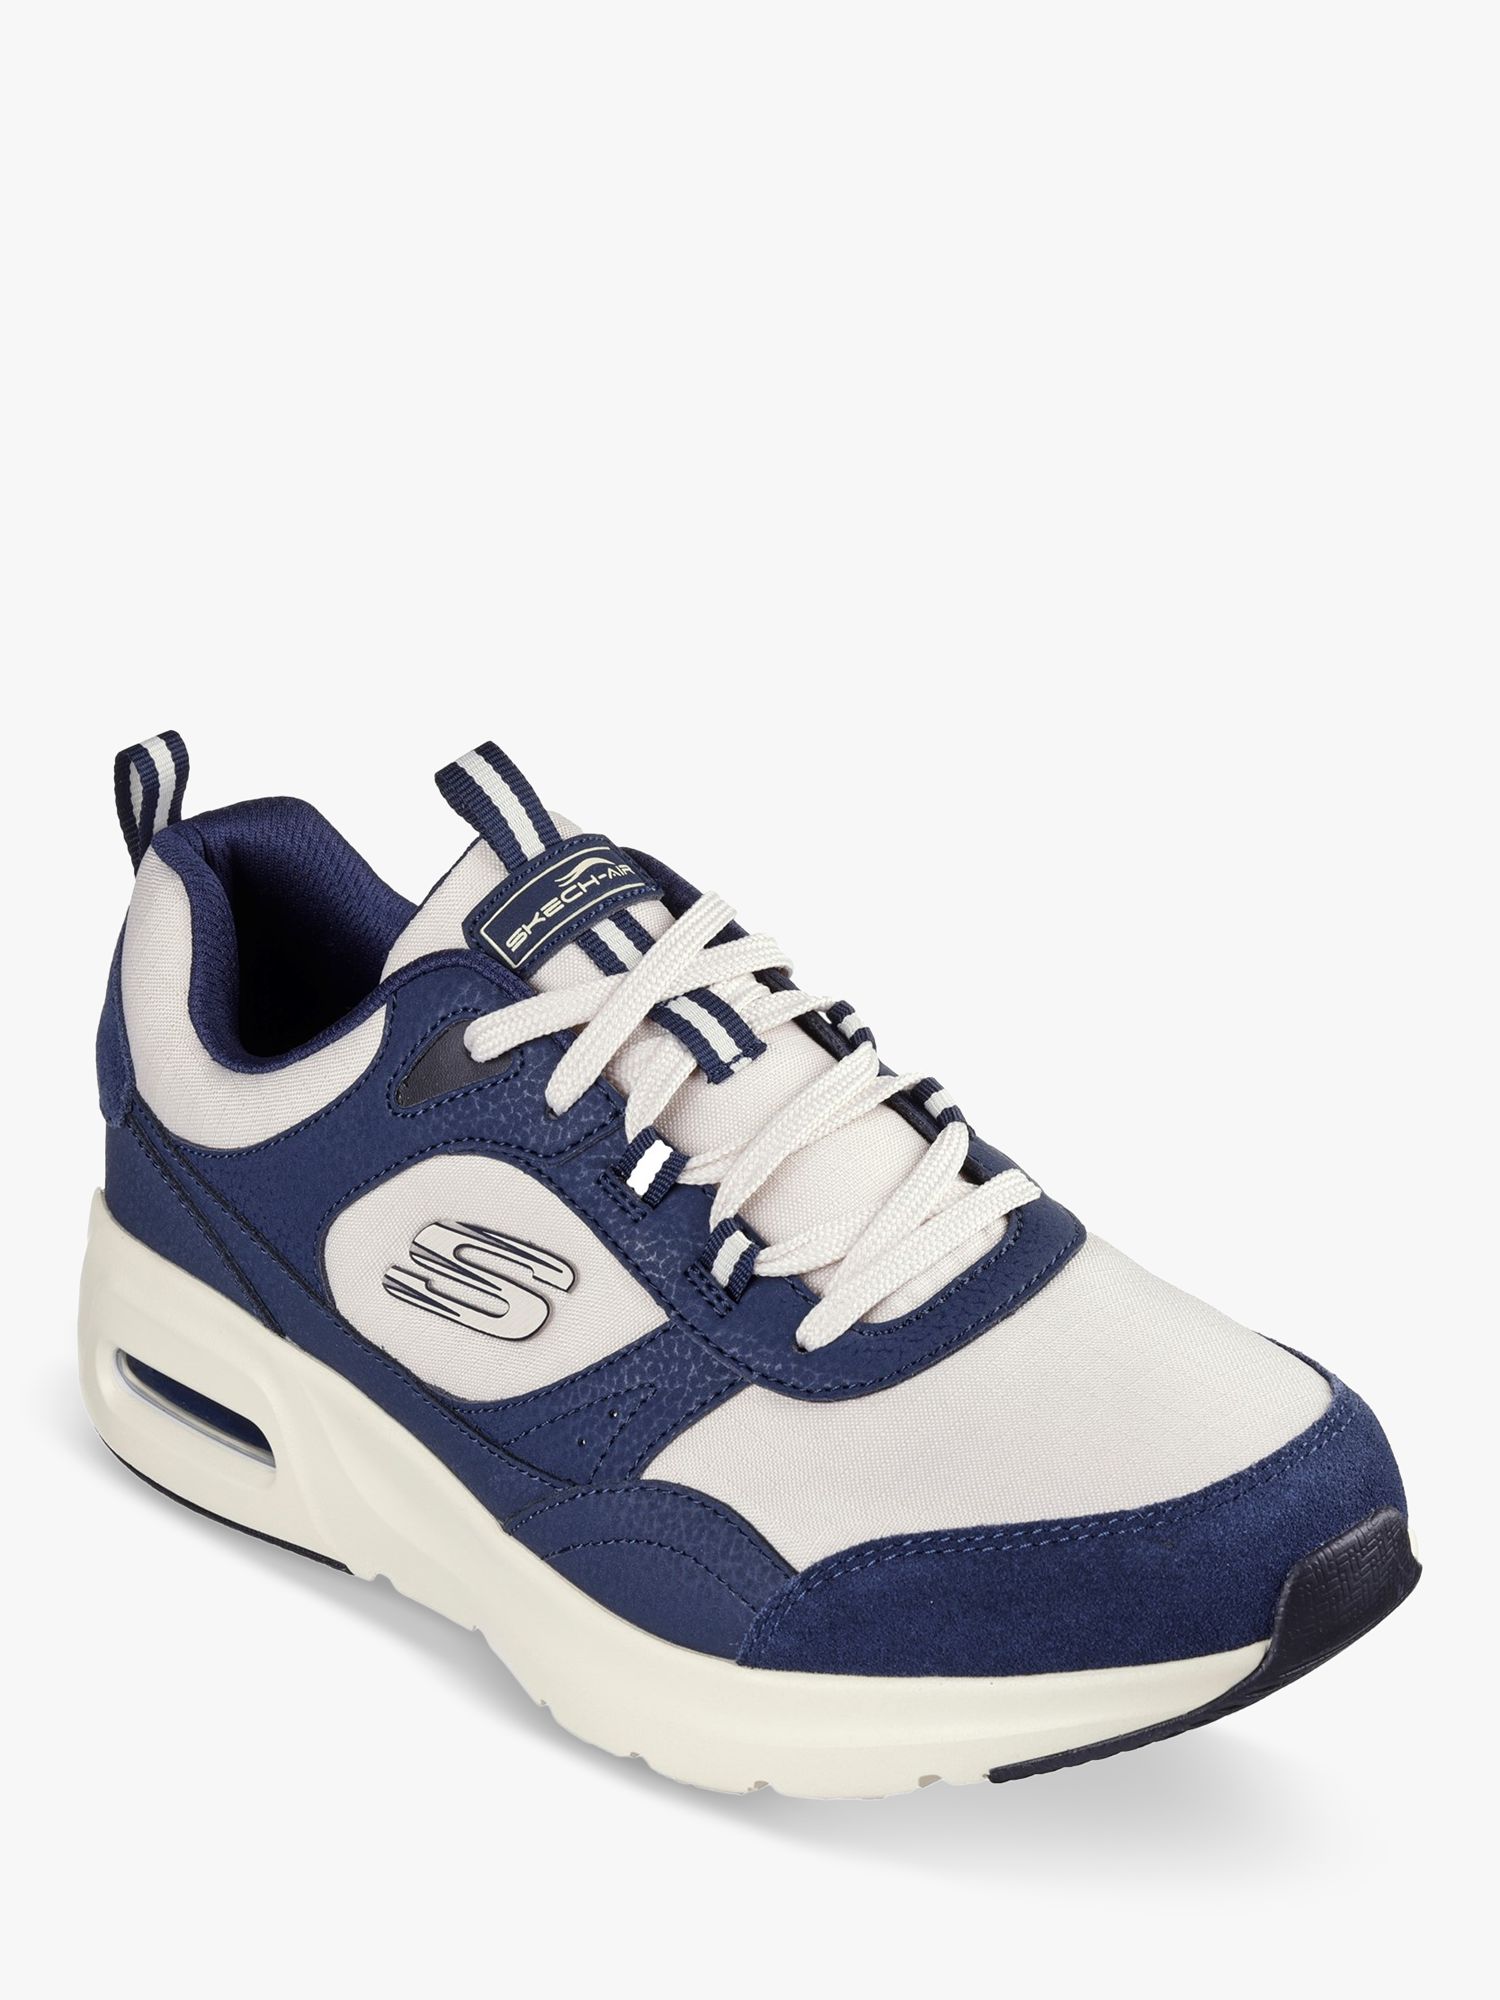 Buy Skechers Skech Air Court Yatton Trainers Online at johnlewis.com